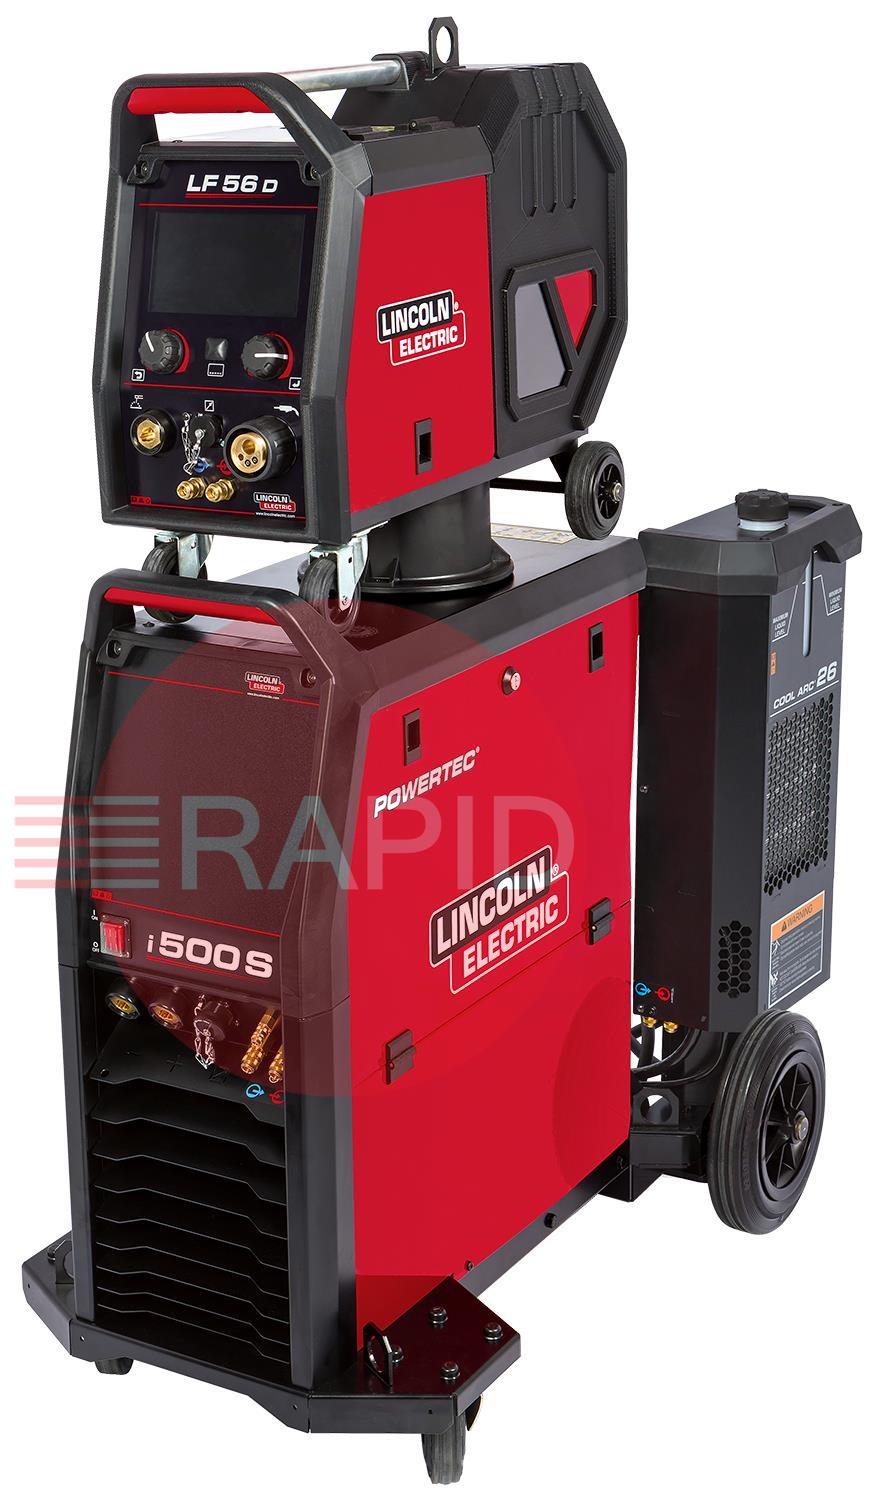 K14185-56-1WP  Lincoln Powertec i500S MIG Welder & LF-56D Wire Feeder Water Cooled Ready To Weld Package - 400v, 3ph